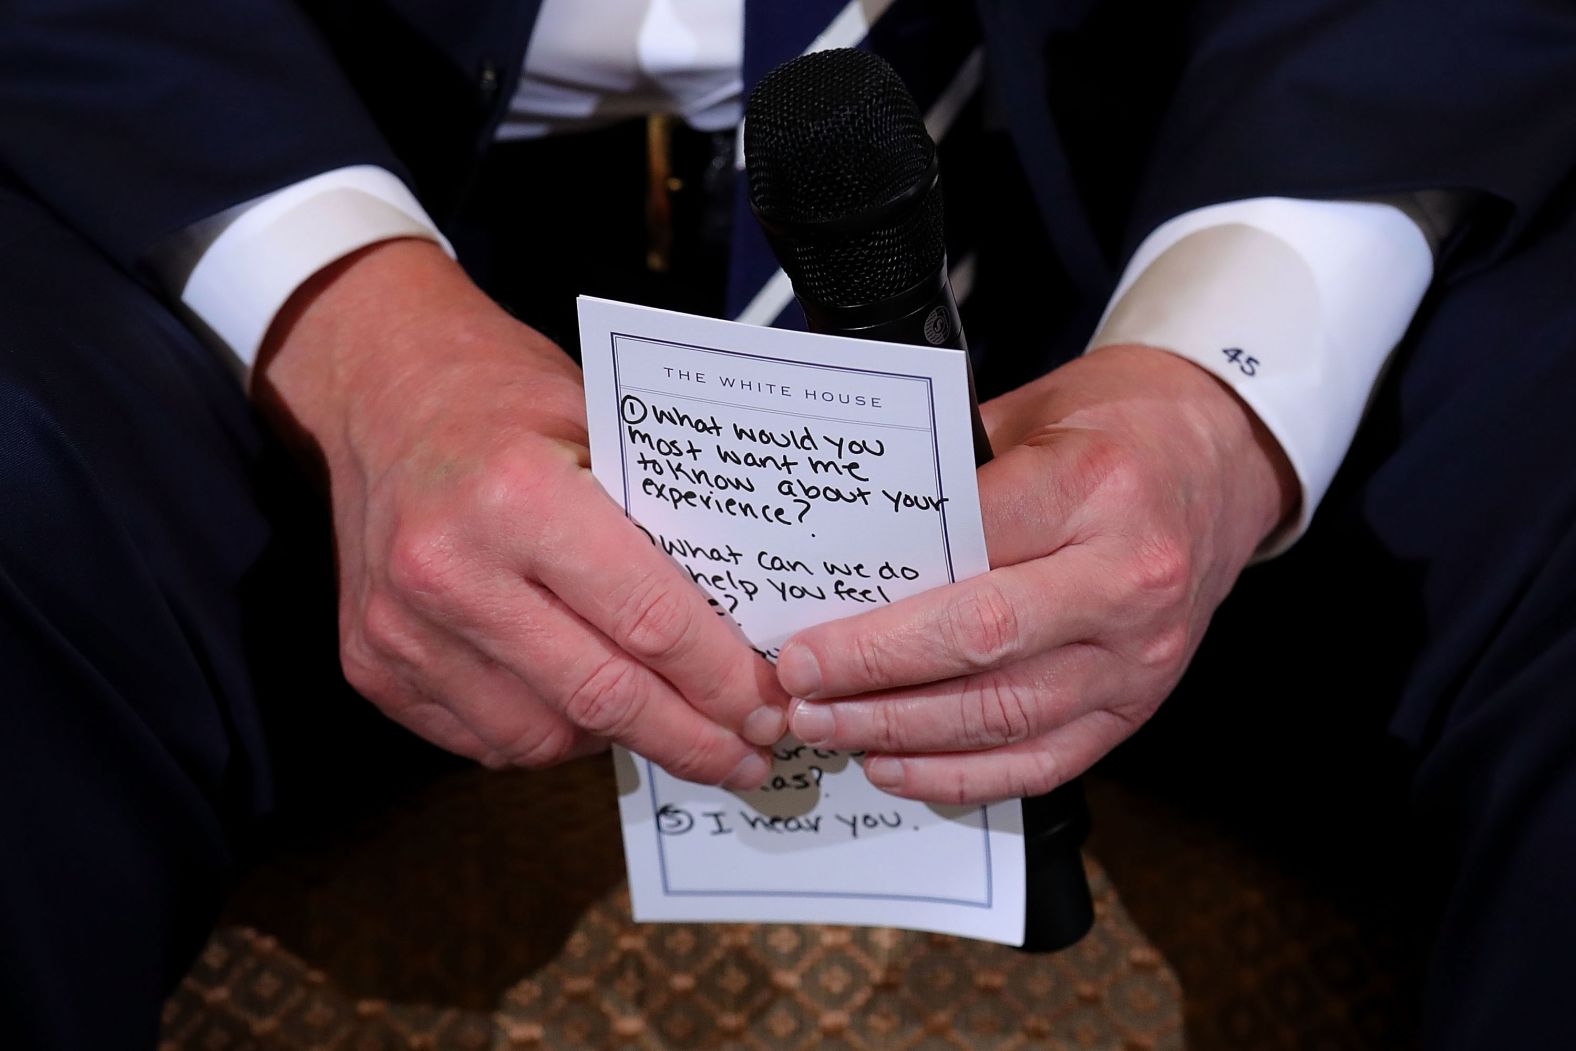 Trump holds his notes while hosting a <a href="index.php?page=&url=https%3A%2F%2Fwww.cnn.com%2F2018%2F02%2F21%2Fpolitics%2Ftrump-listening-sessions-parkland-students%2Findex.html" target="_blank">listening session with student survivors</a> of mass shootings, their parents and teachers in February 2018. The <a href="index.php?page=&url=https%3A%2F%2Fwww.cnn.com%2F2018%2F02%2F21%2Fpolitics%2Ftrump-parkland-notecard%2Findex.html" target="_blank">visible points included prompts</a> such as "1. What would you most want me to know about your experience?" "2. What can we do to help you feel safe?" and "5. I hear you."